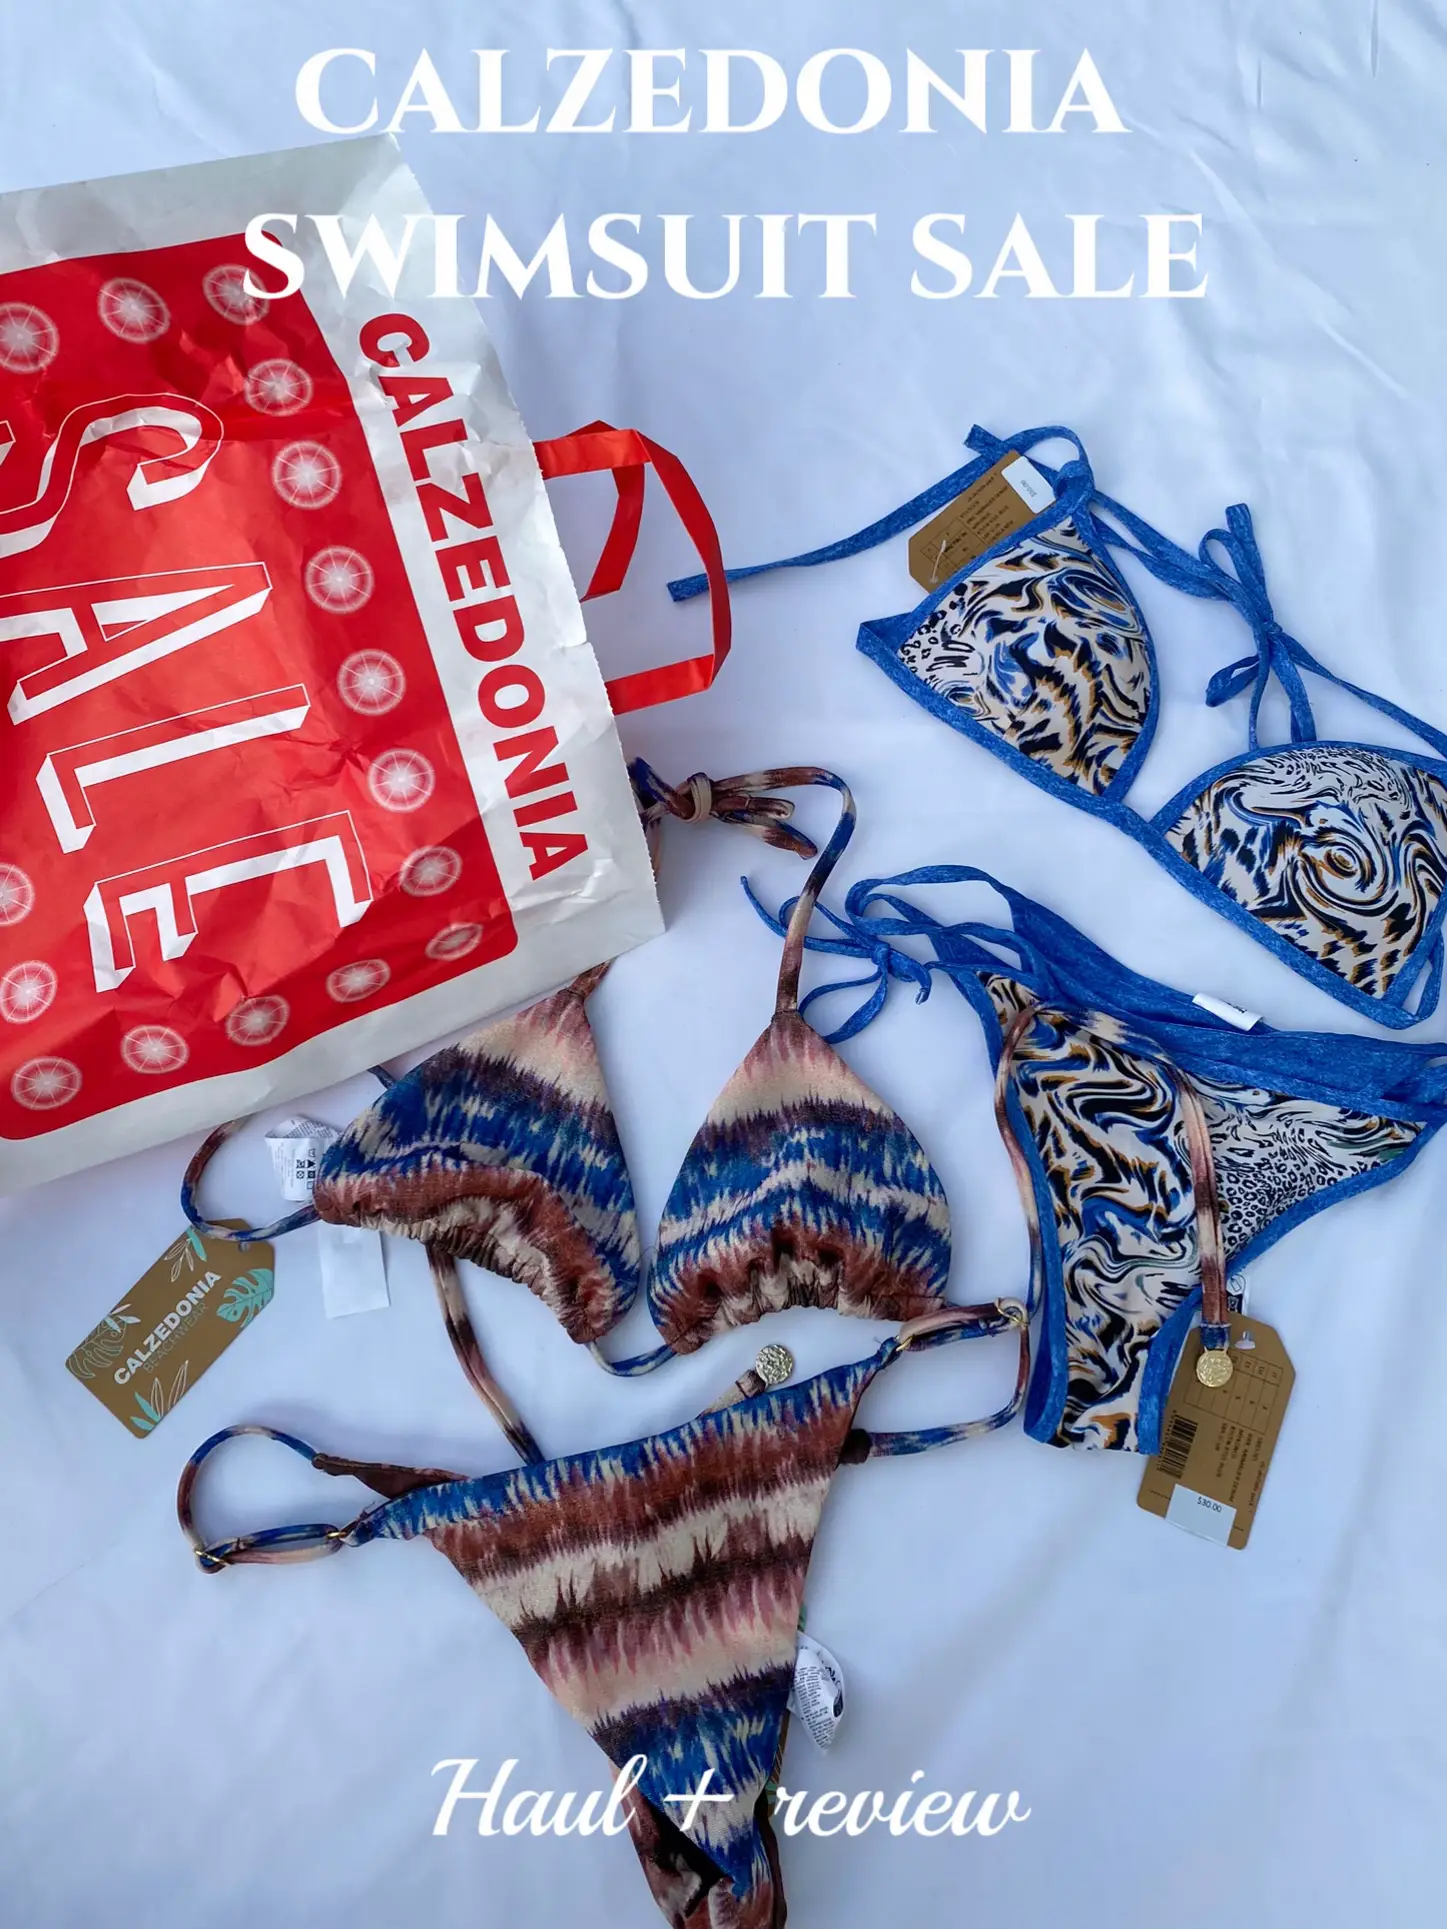 Calzedonia Swimsuit Sale Haul, Gallery posted by Lexirosenstein